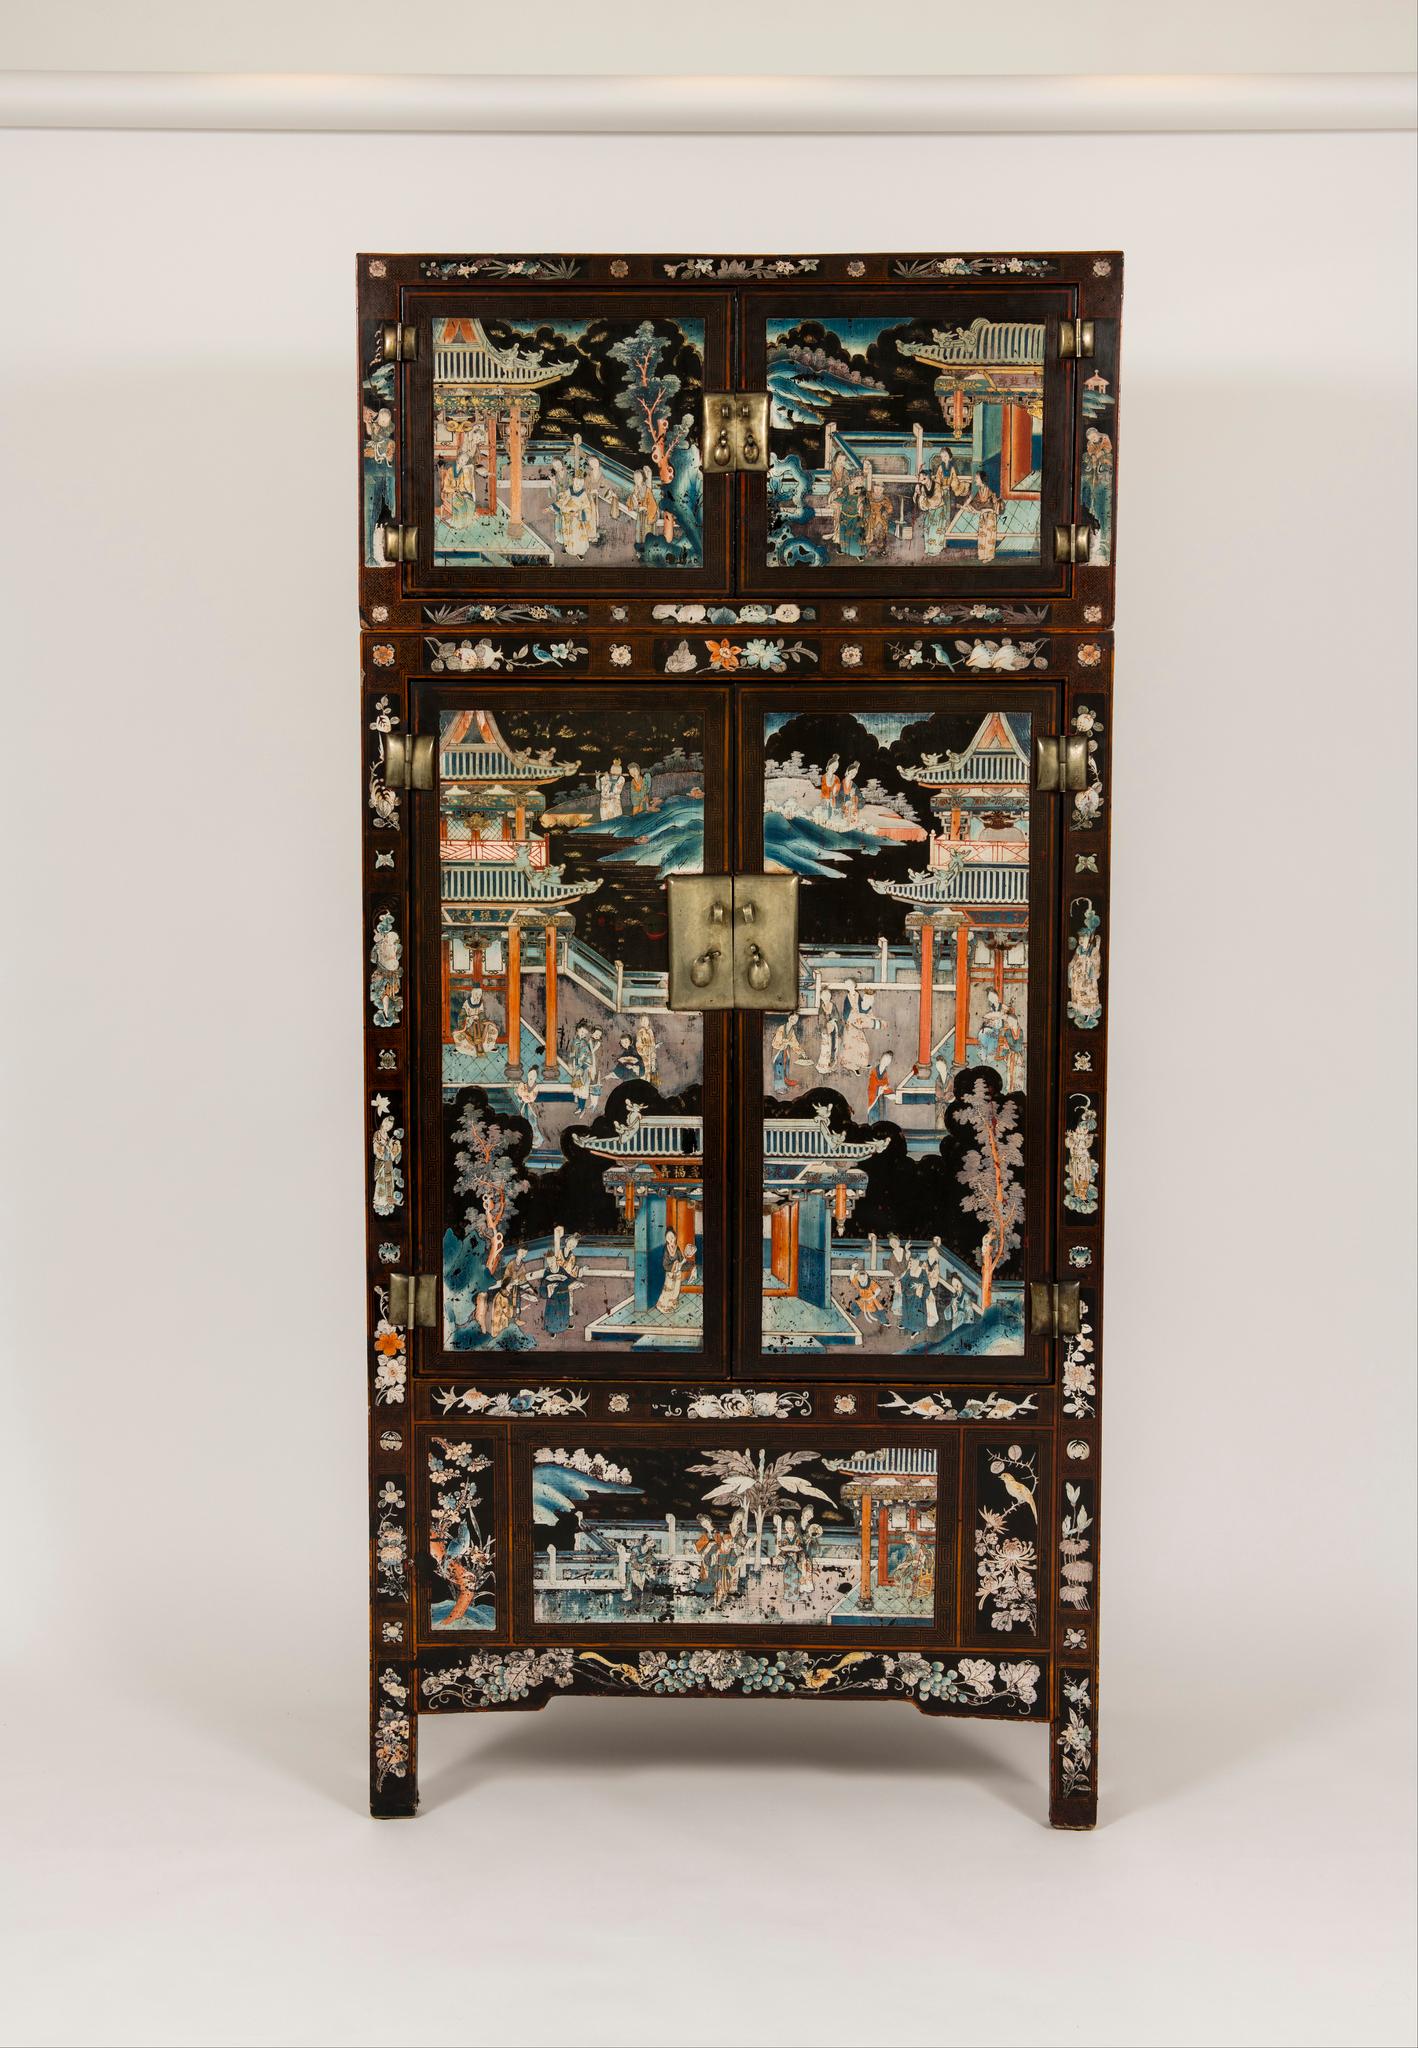 A spectacular pair of early 20th century Chinese lacquered Ming style compound cabinets with painted scenes of figures in a temporal garden landscape. Still vividly colored, the lavish decorations cover the cabinets from top to bottom, complemented